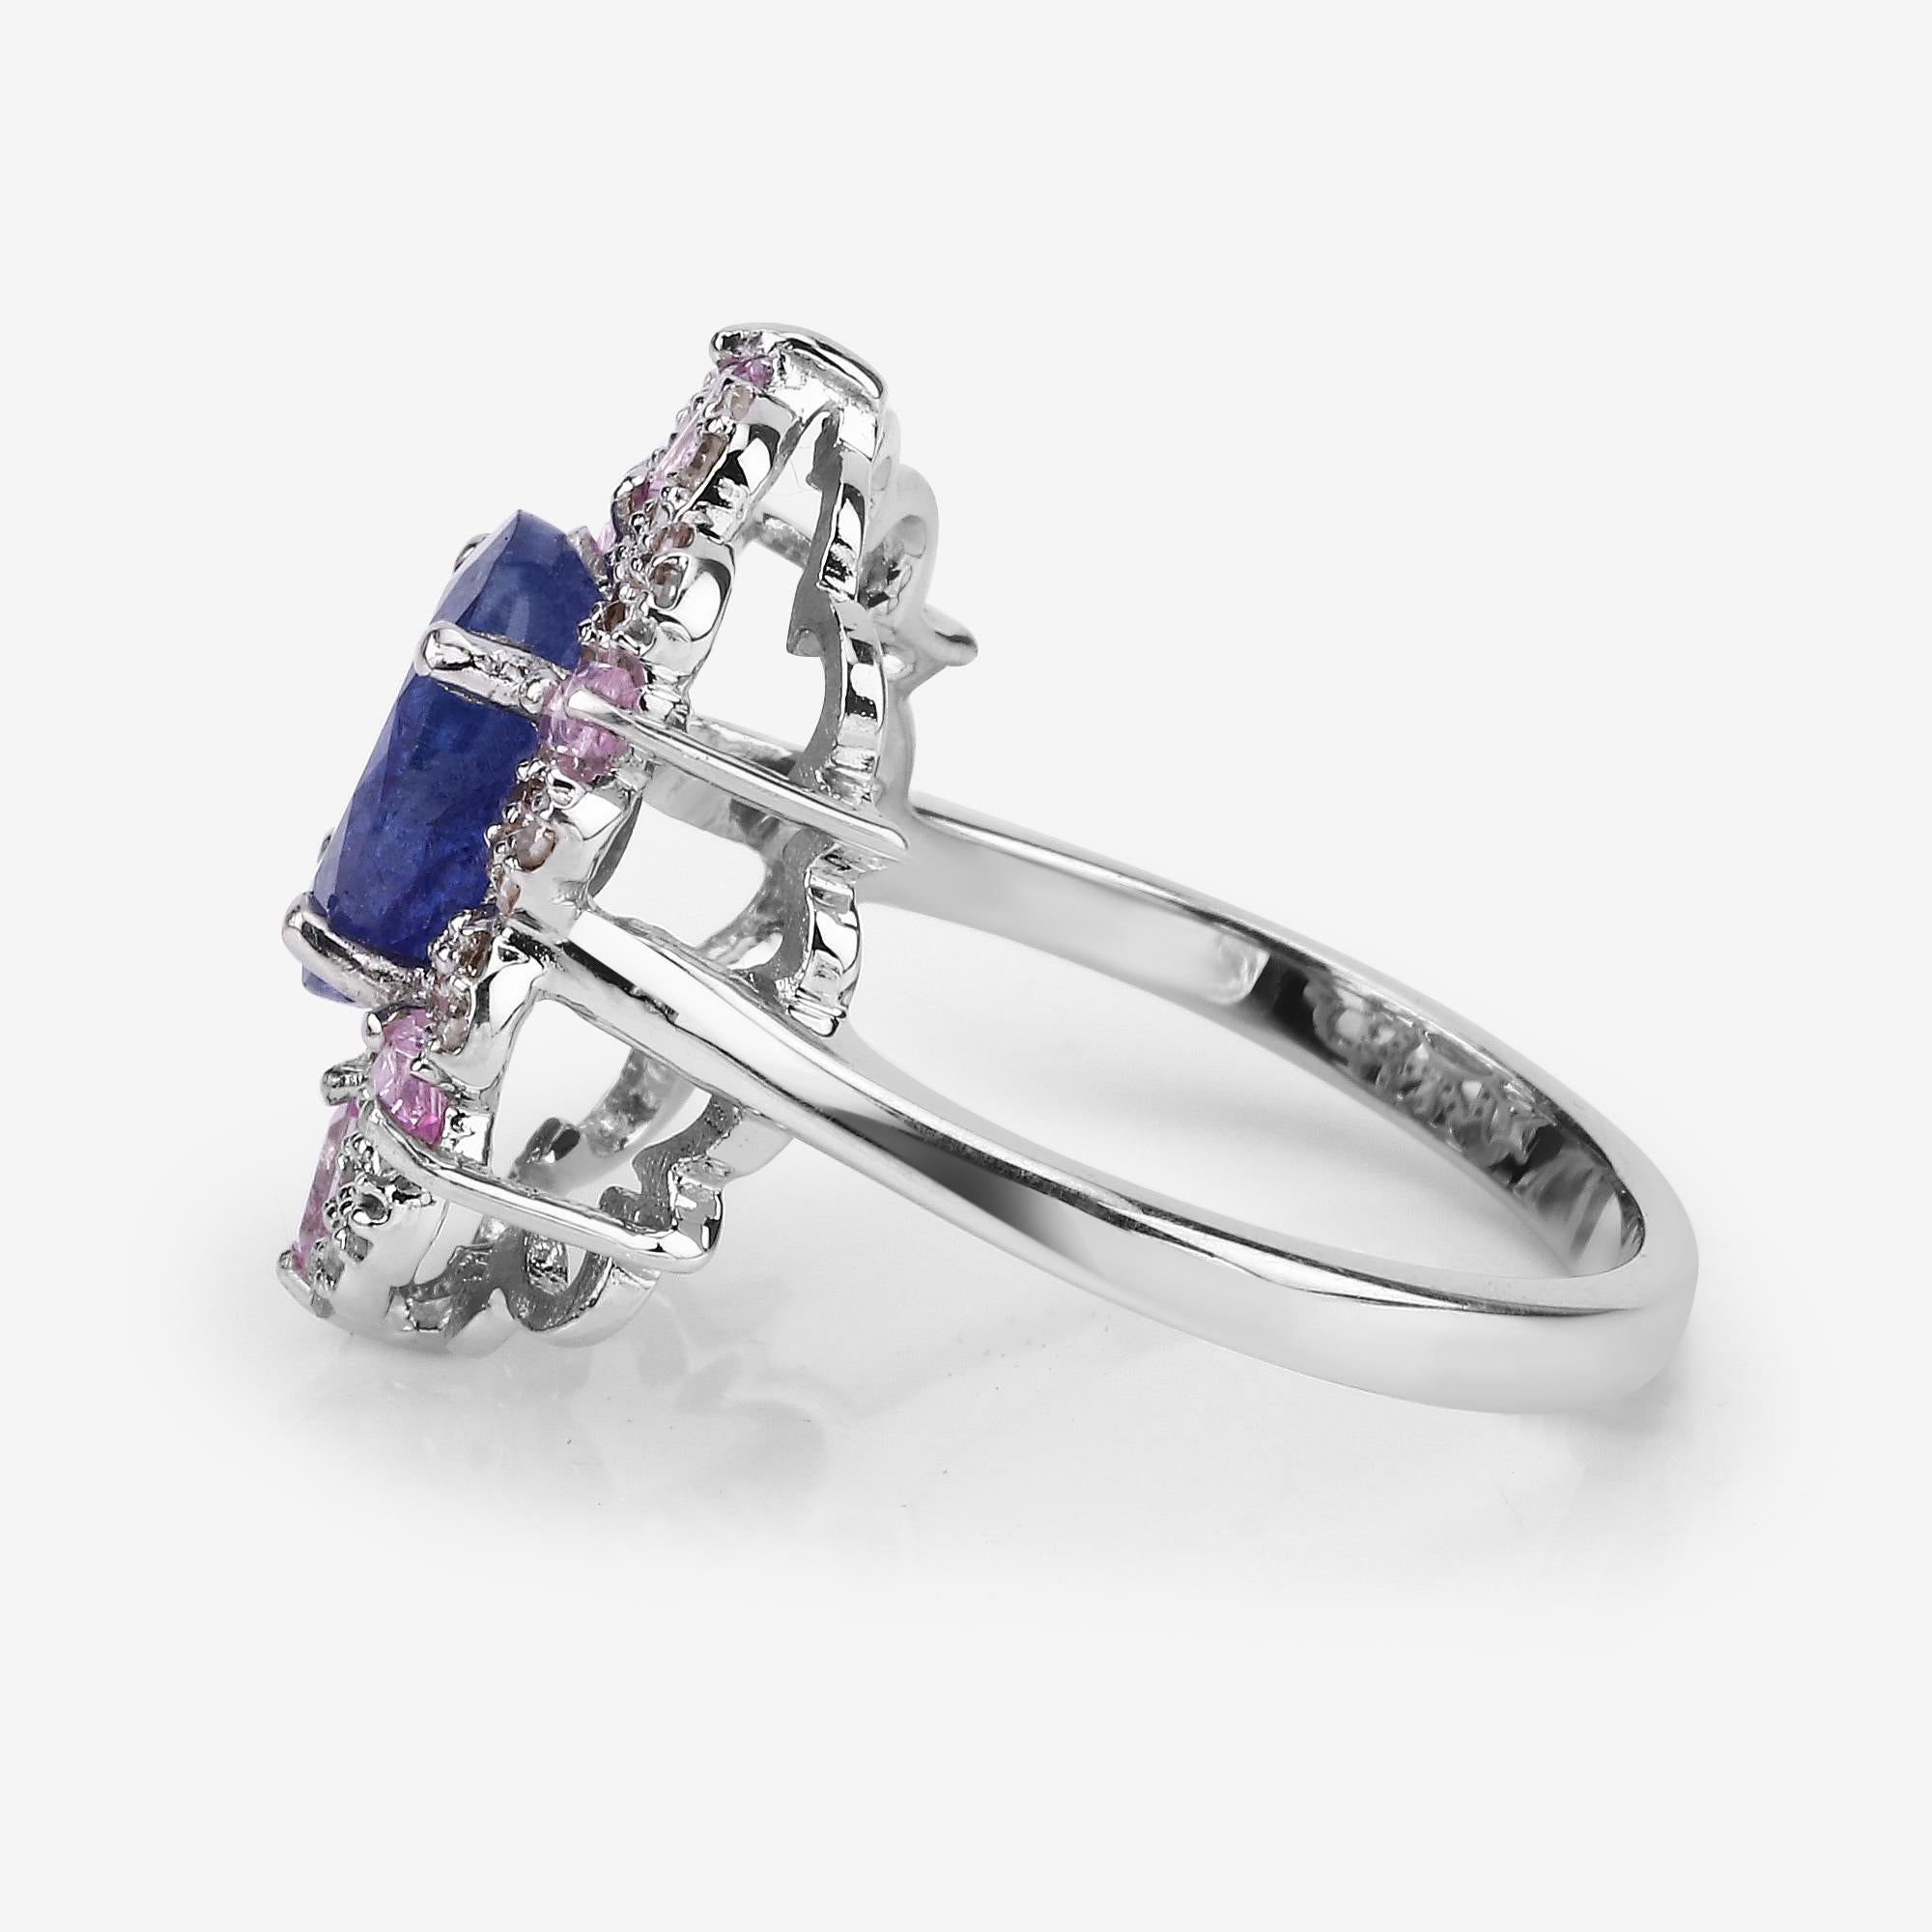 Victorian 3.01cttw Tanzanite, Pink Sapphires with Diamonds 0.41cttw Sterling Silver Ring